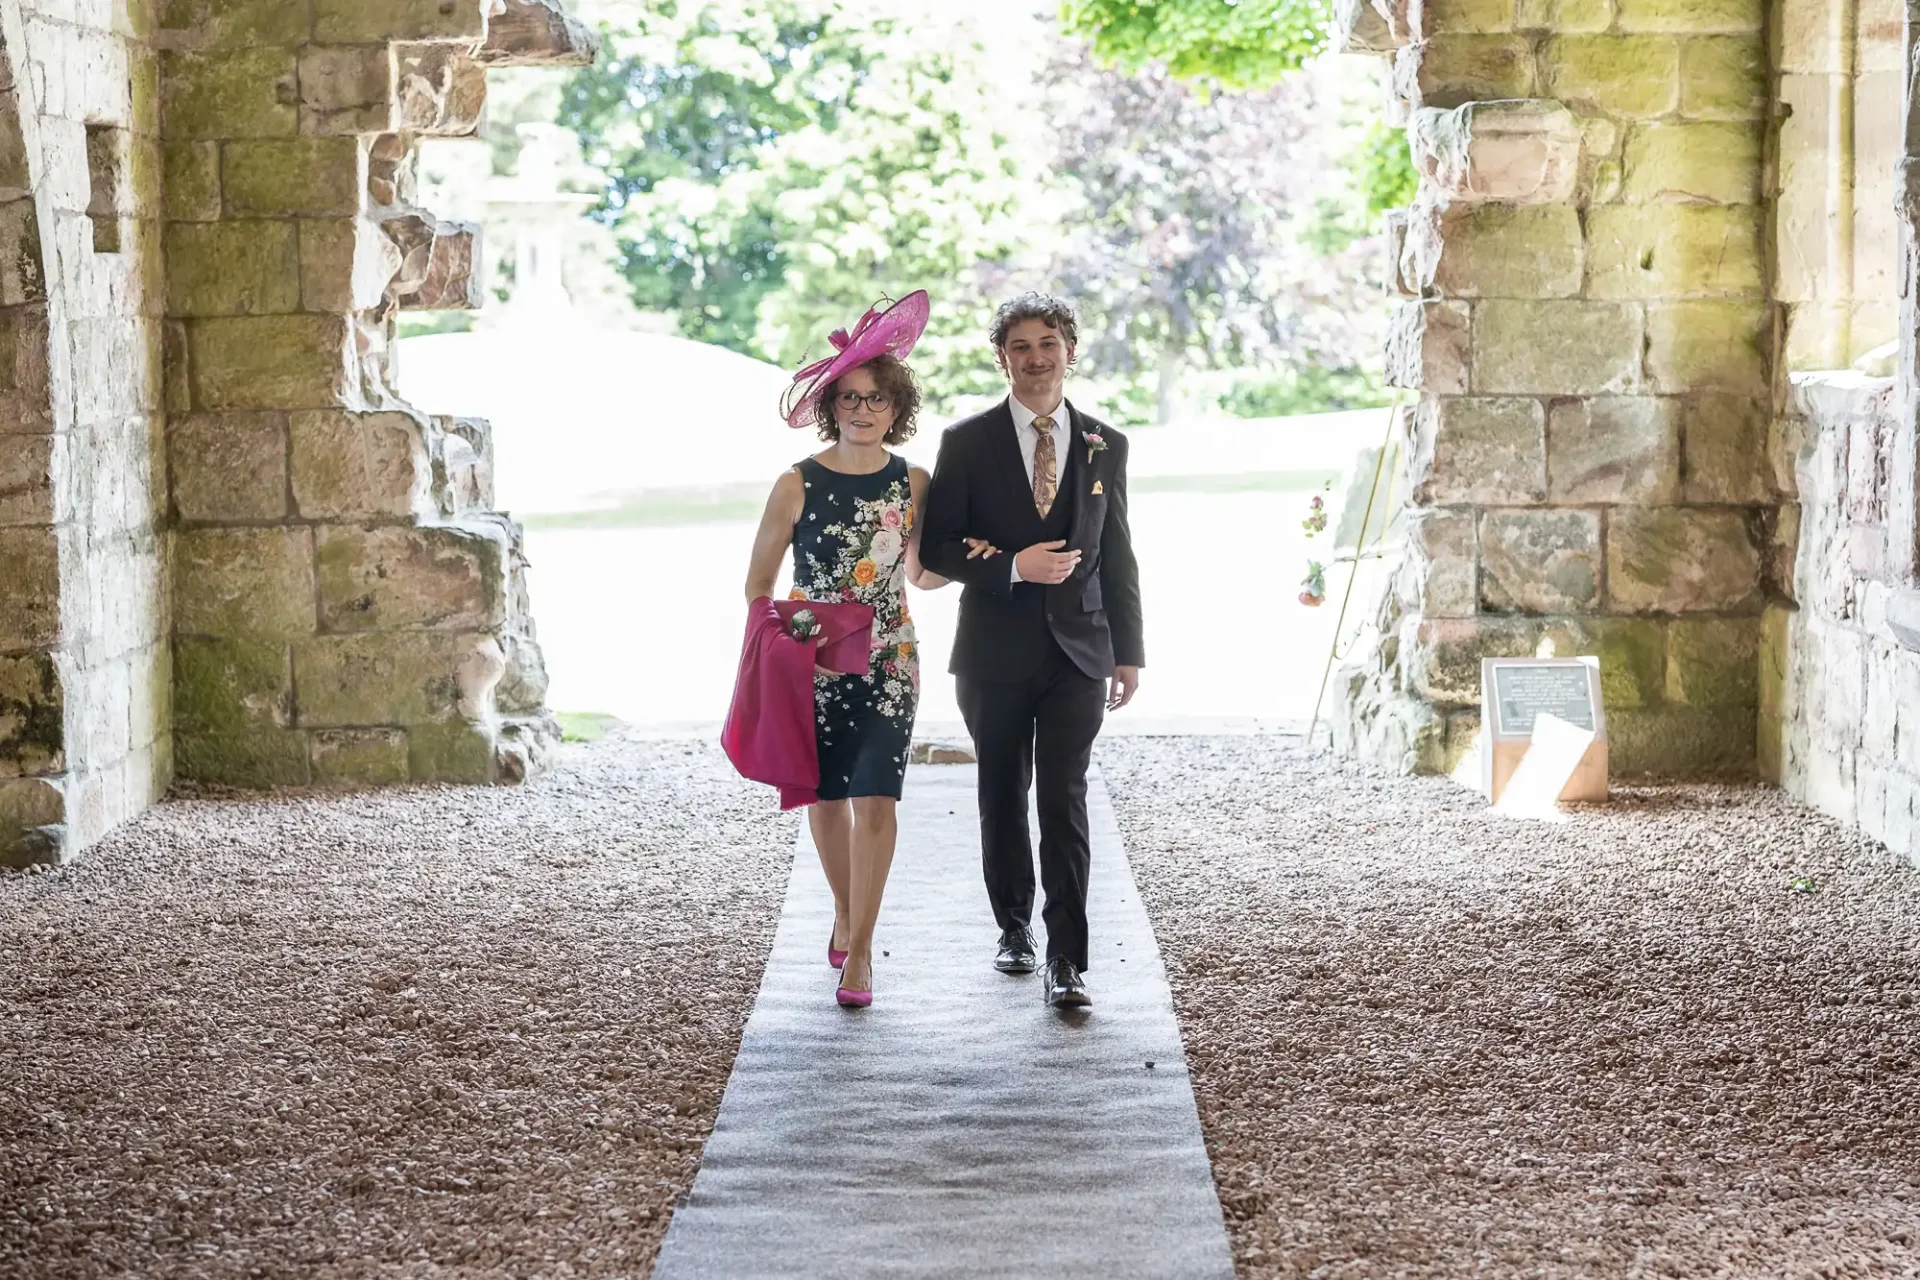 A woman in a pink hat and floral dress and a man in a black suit walk together on a gravel path under an archway.